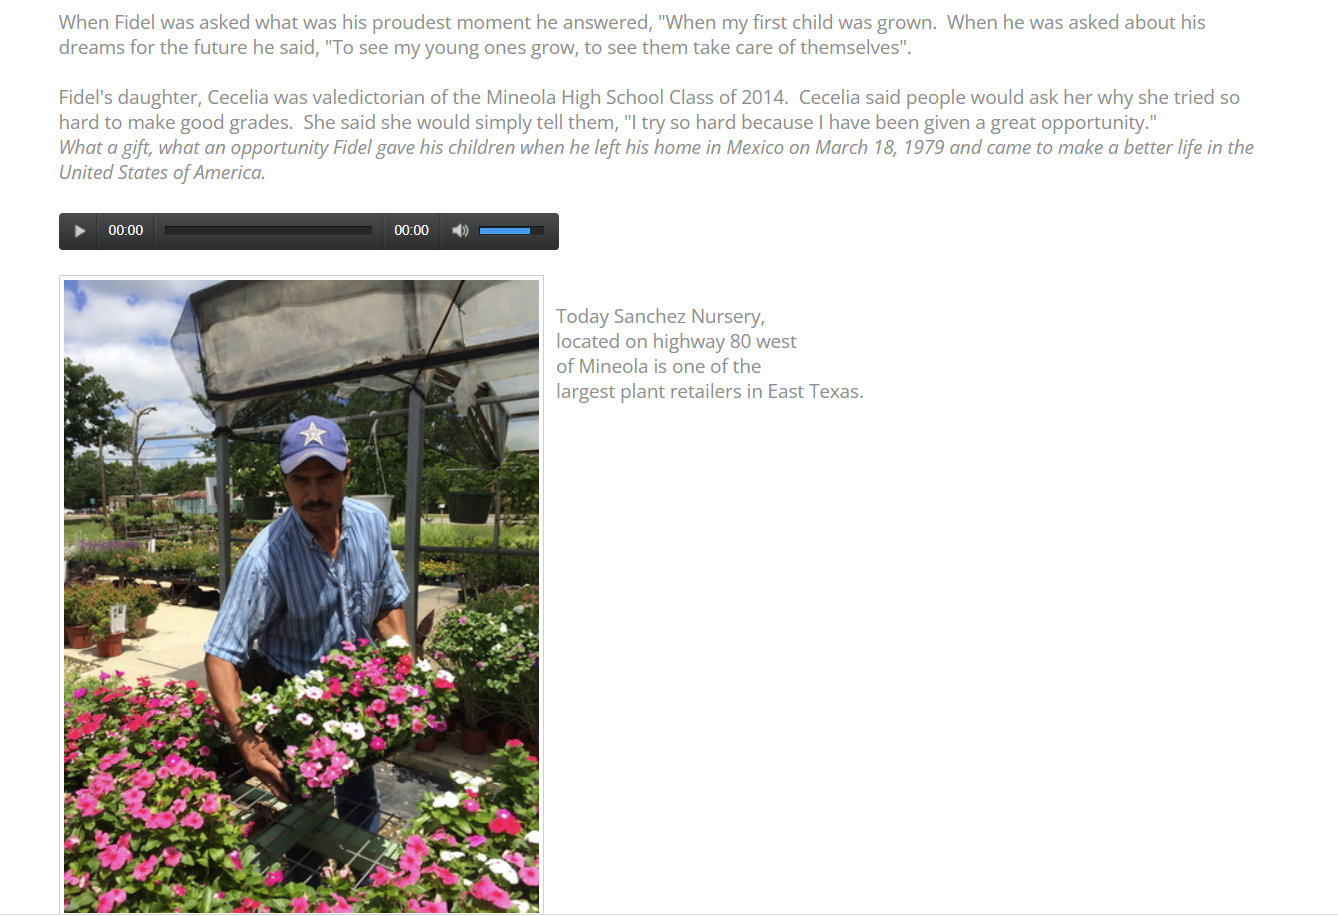 Screenshot from a student-created website that includes a photo of a man in a ballcap with trays of flowers.